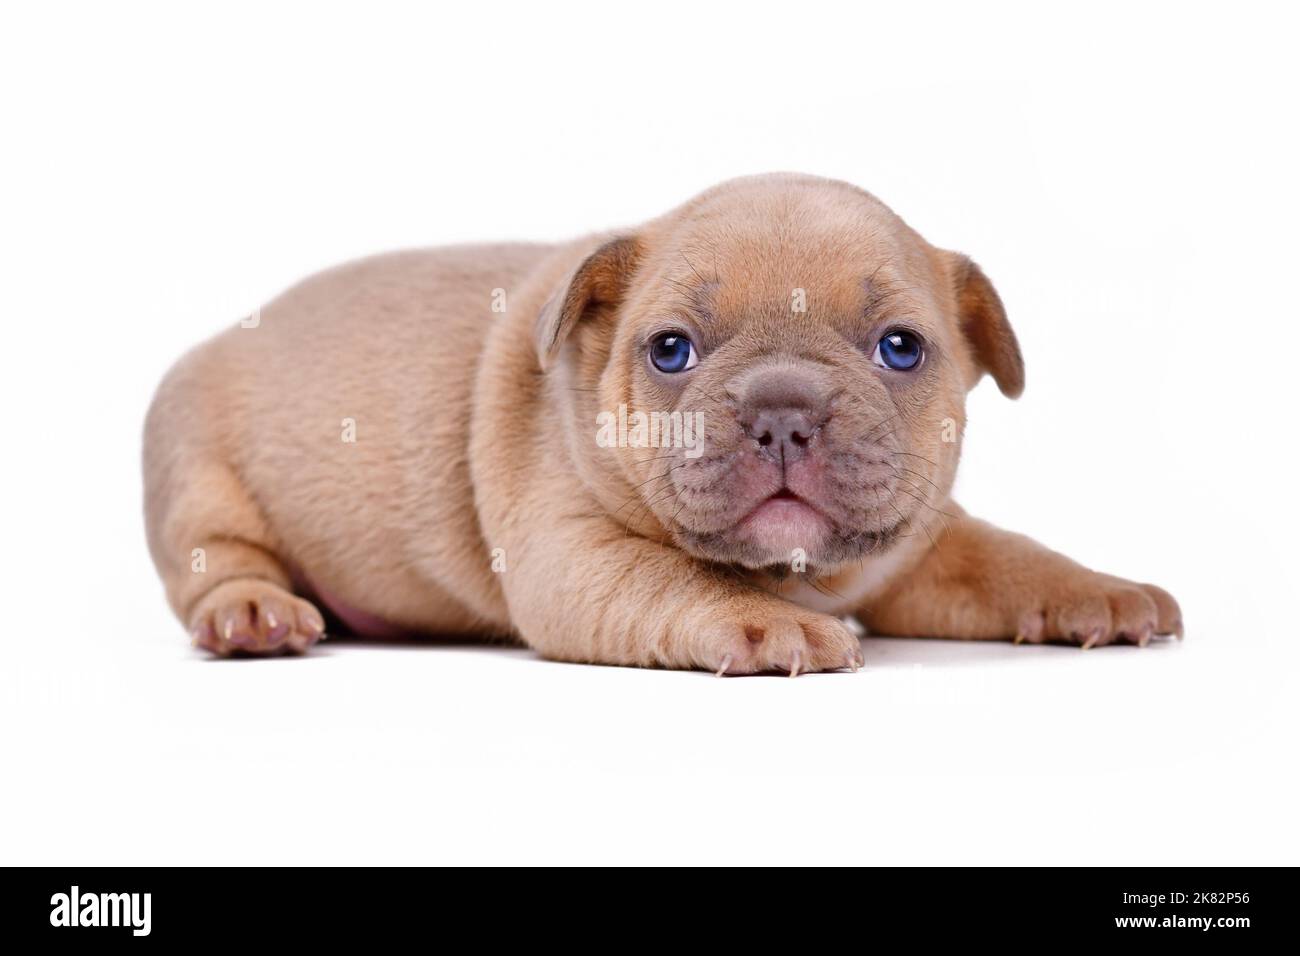 Cute cream lilac fawn colored 3 weeks old French Bulldog dog puppy with blue eyes on white background Stock Photo